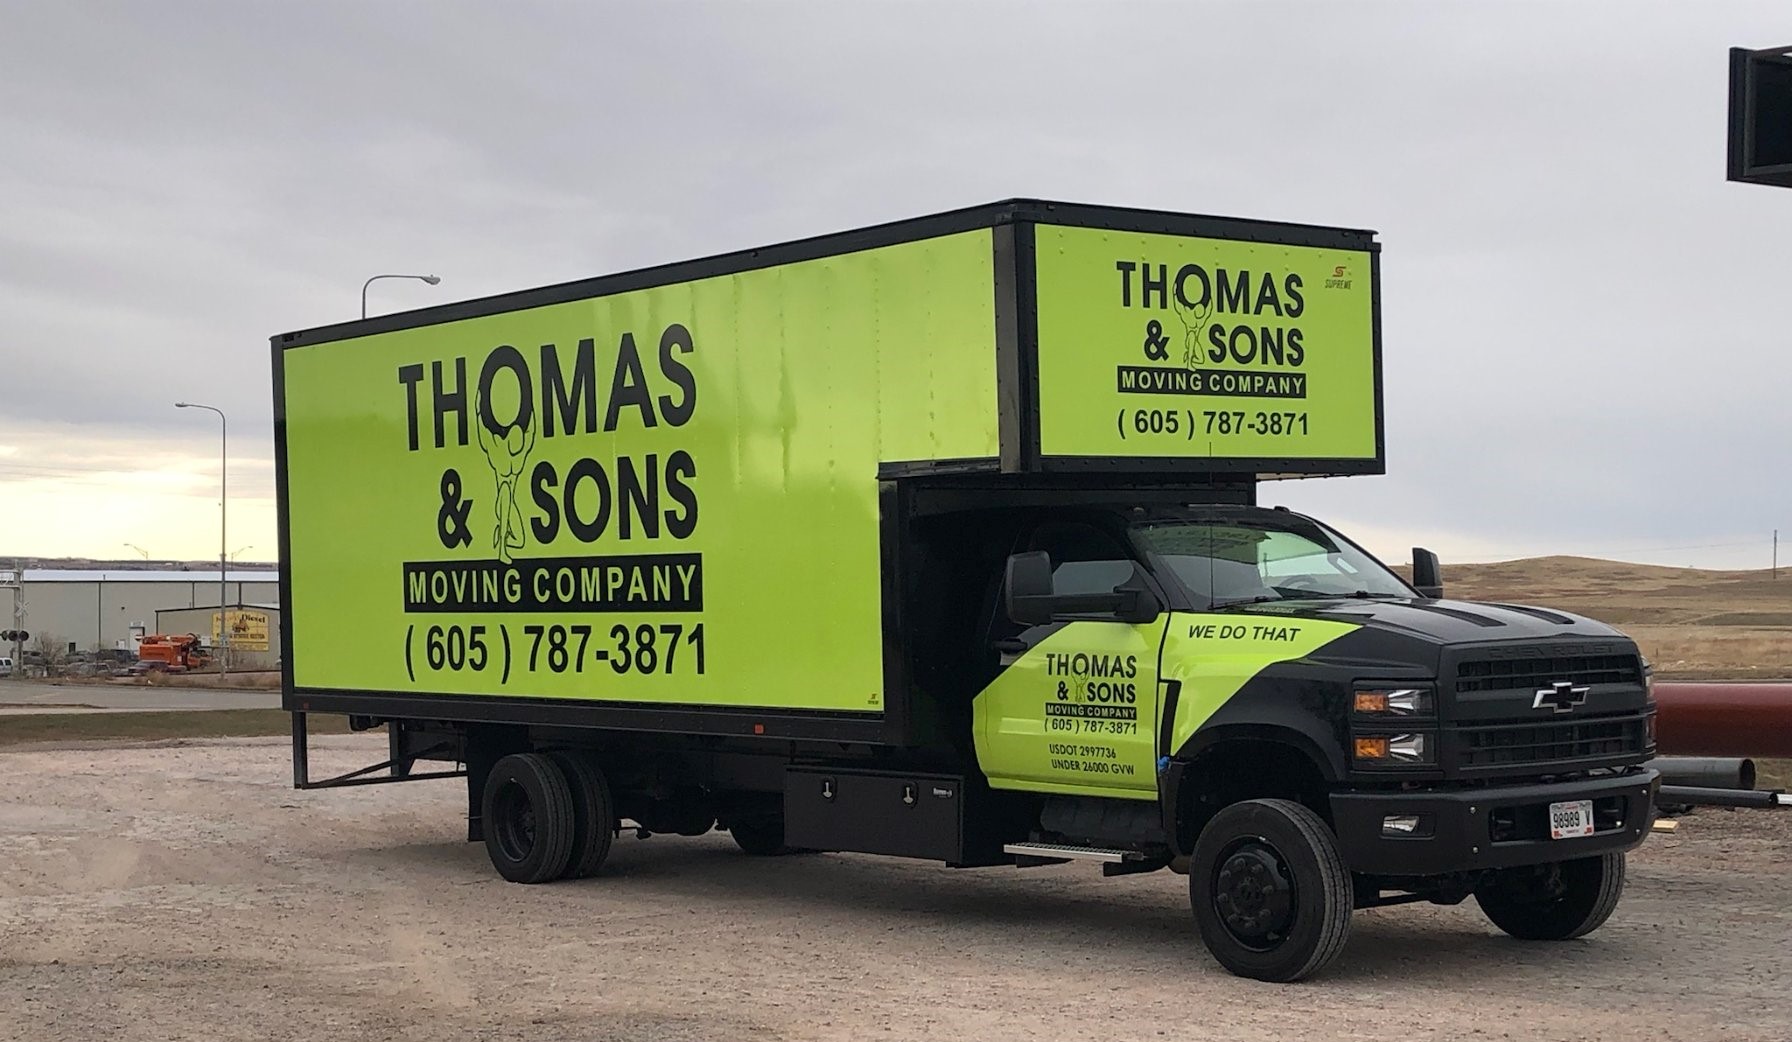 A truck with the thomas and sons moving company logo on it.